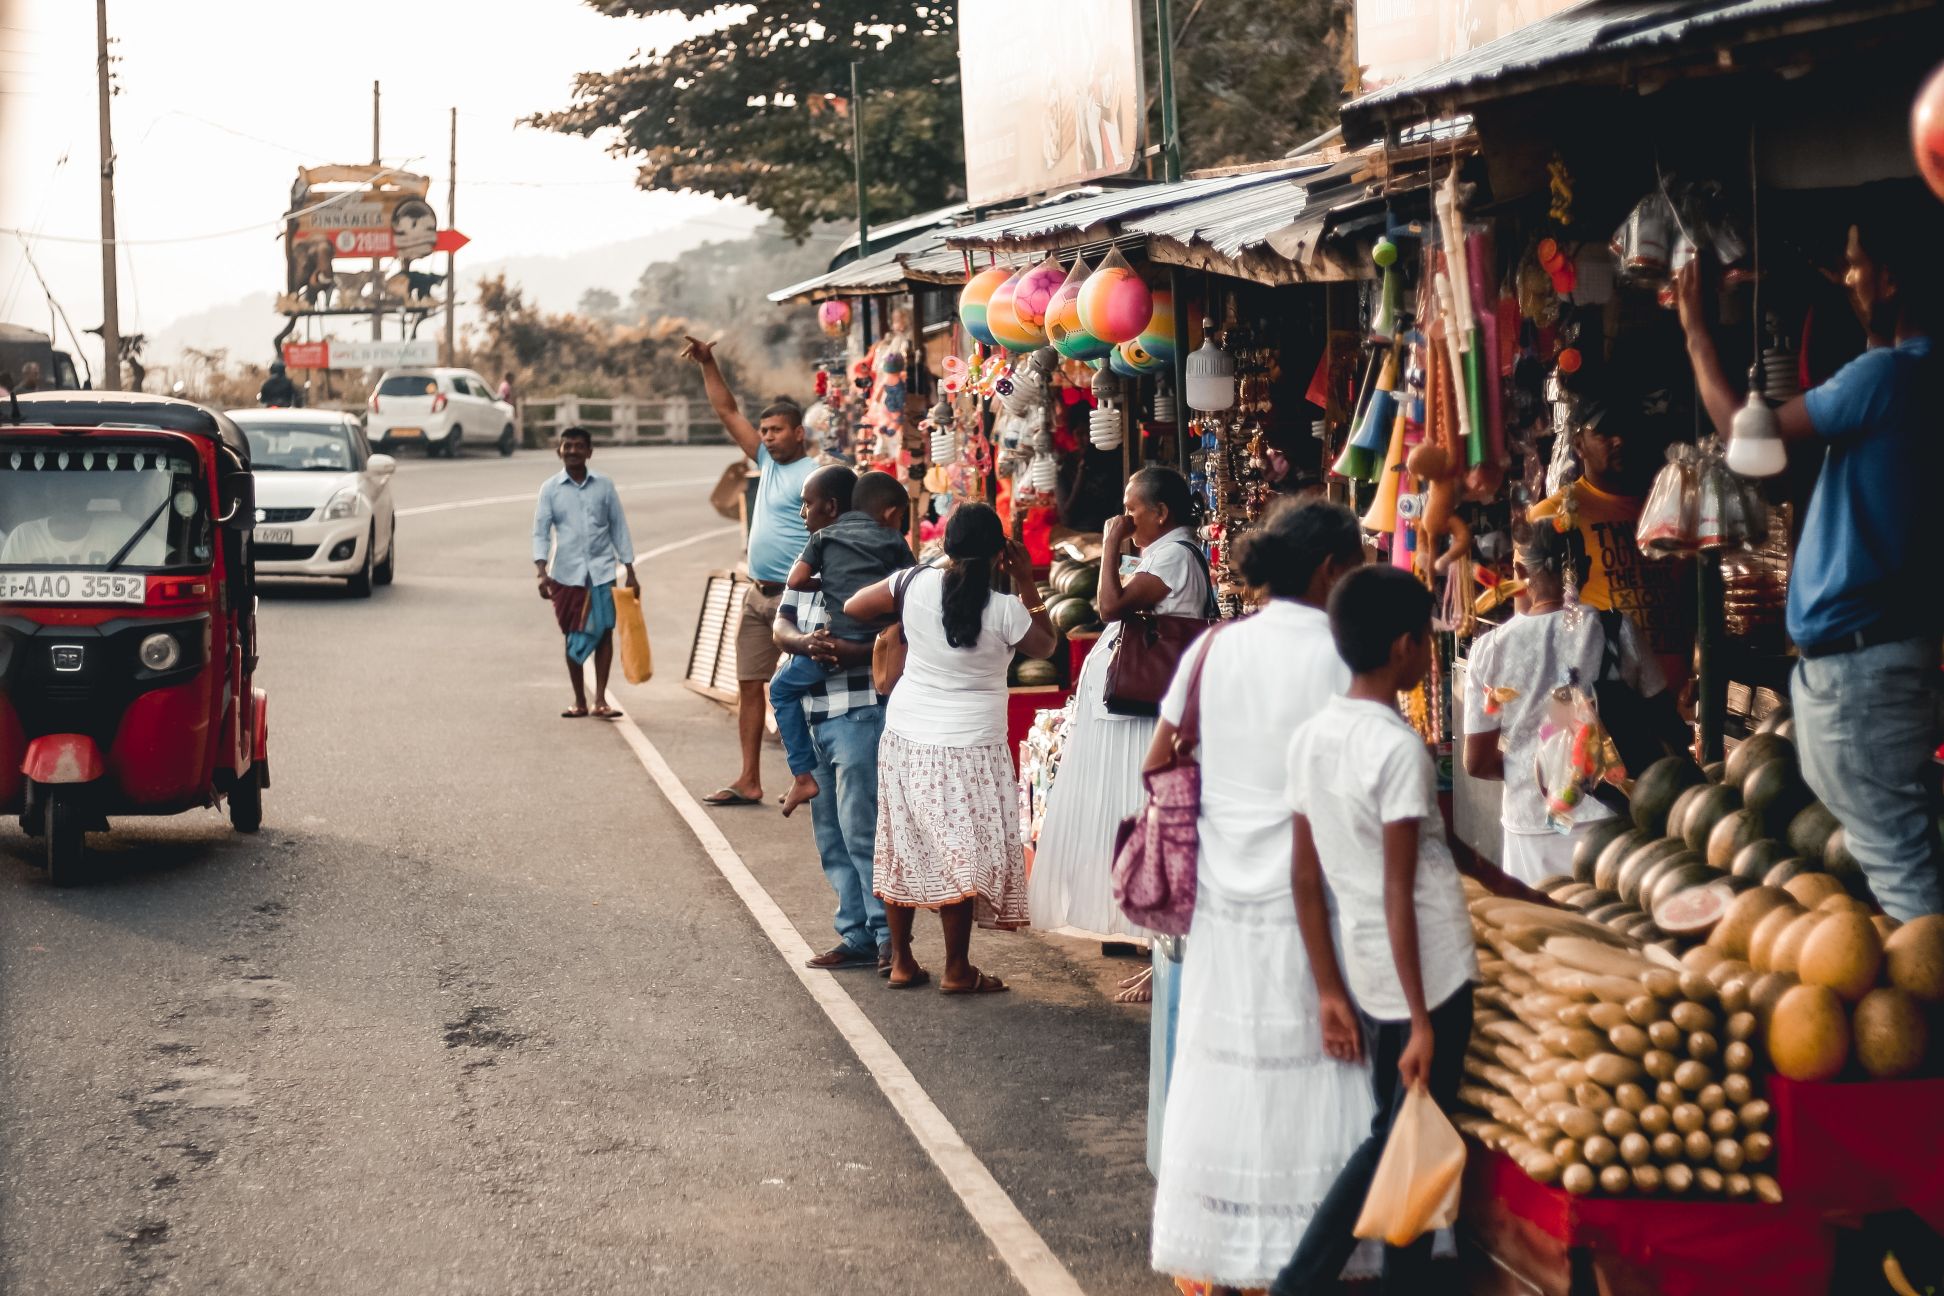 A roadside in Sri Lanka, with people waiting for taxis and browsing stalls.